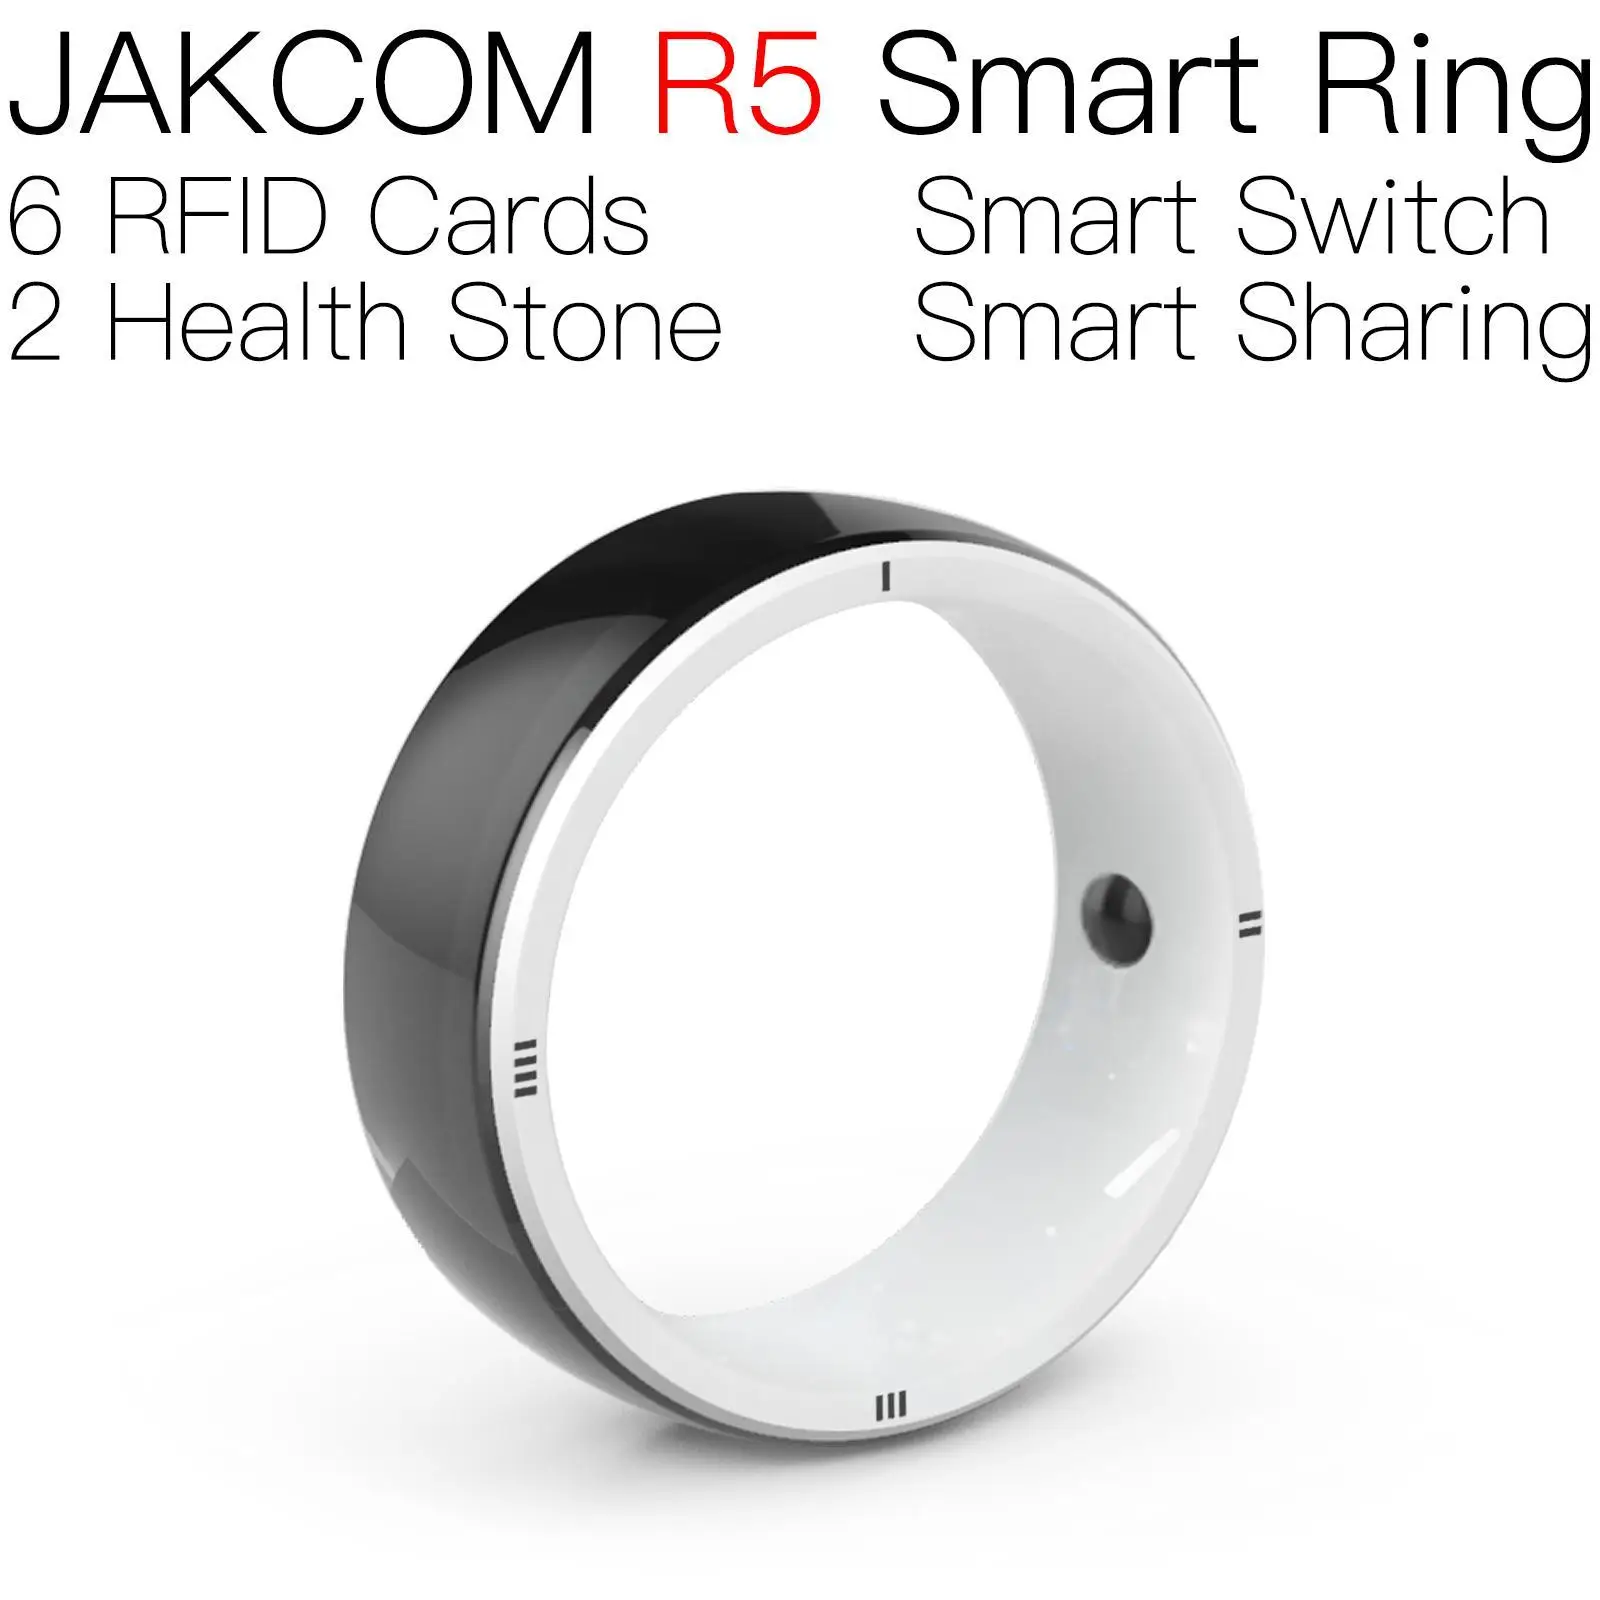 

JAKCOM R5 Smart Ring Super value than band fashion bend 7 bro smart watch offical store 6 auto